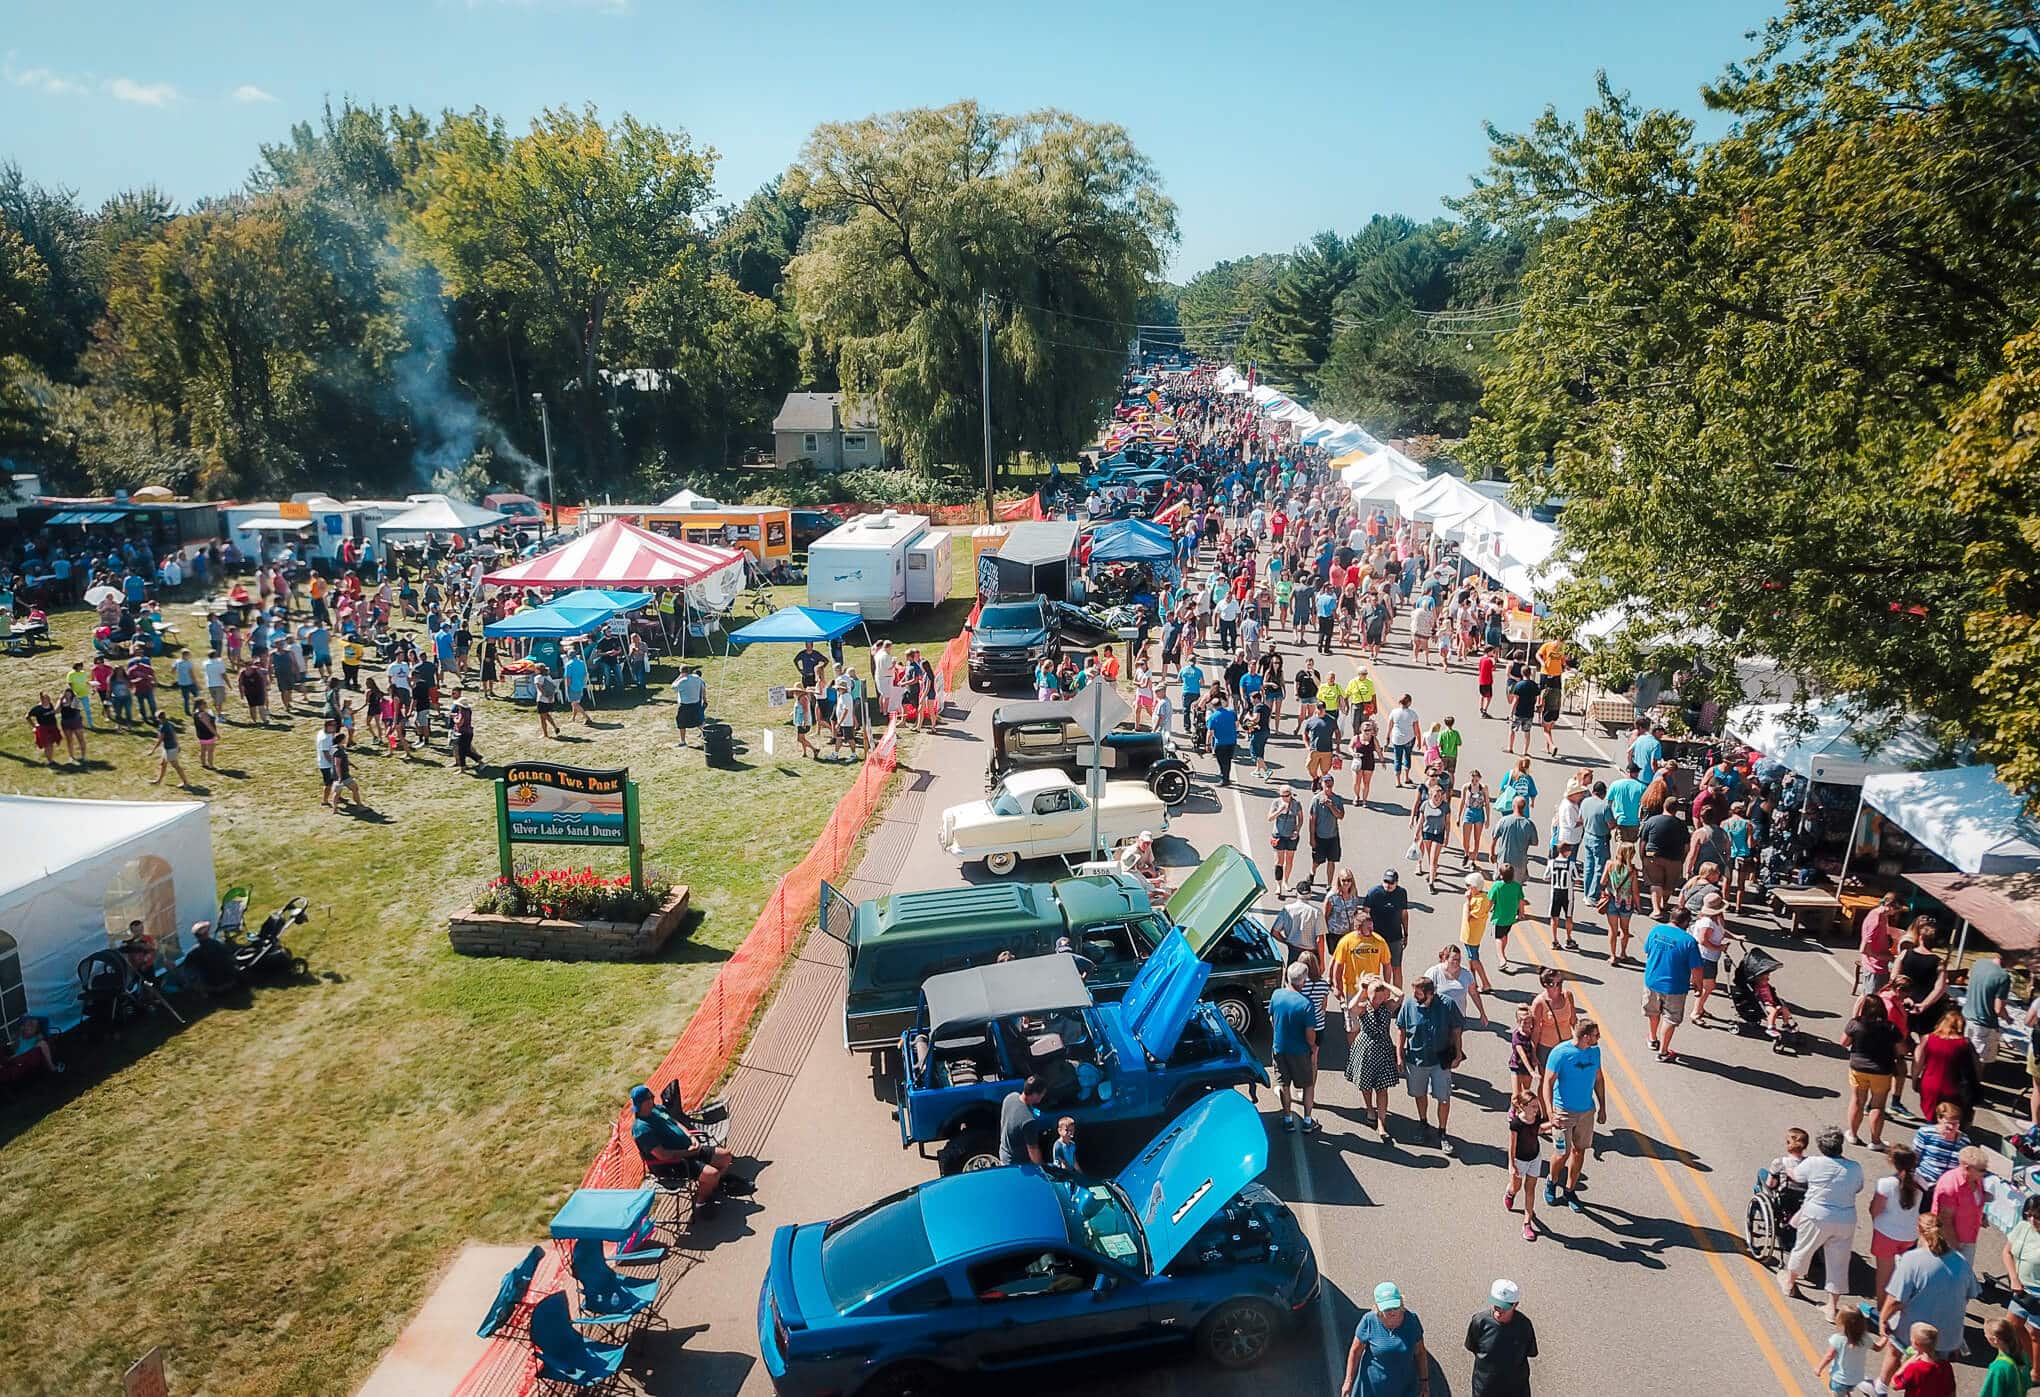 An aerial view of the festival and people looking and the cars and buying food